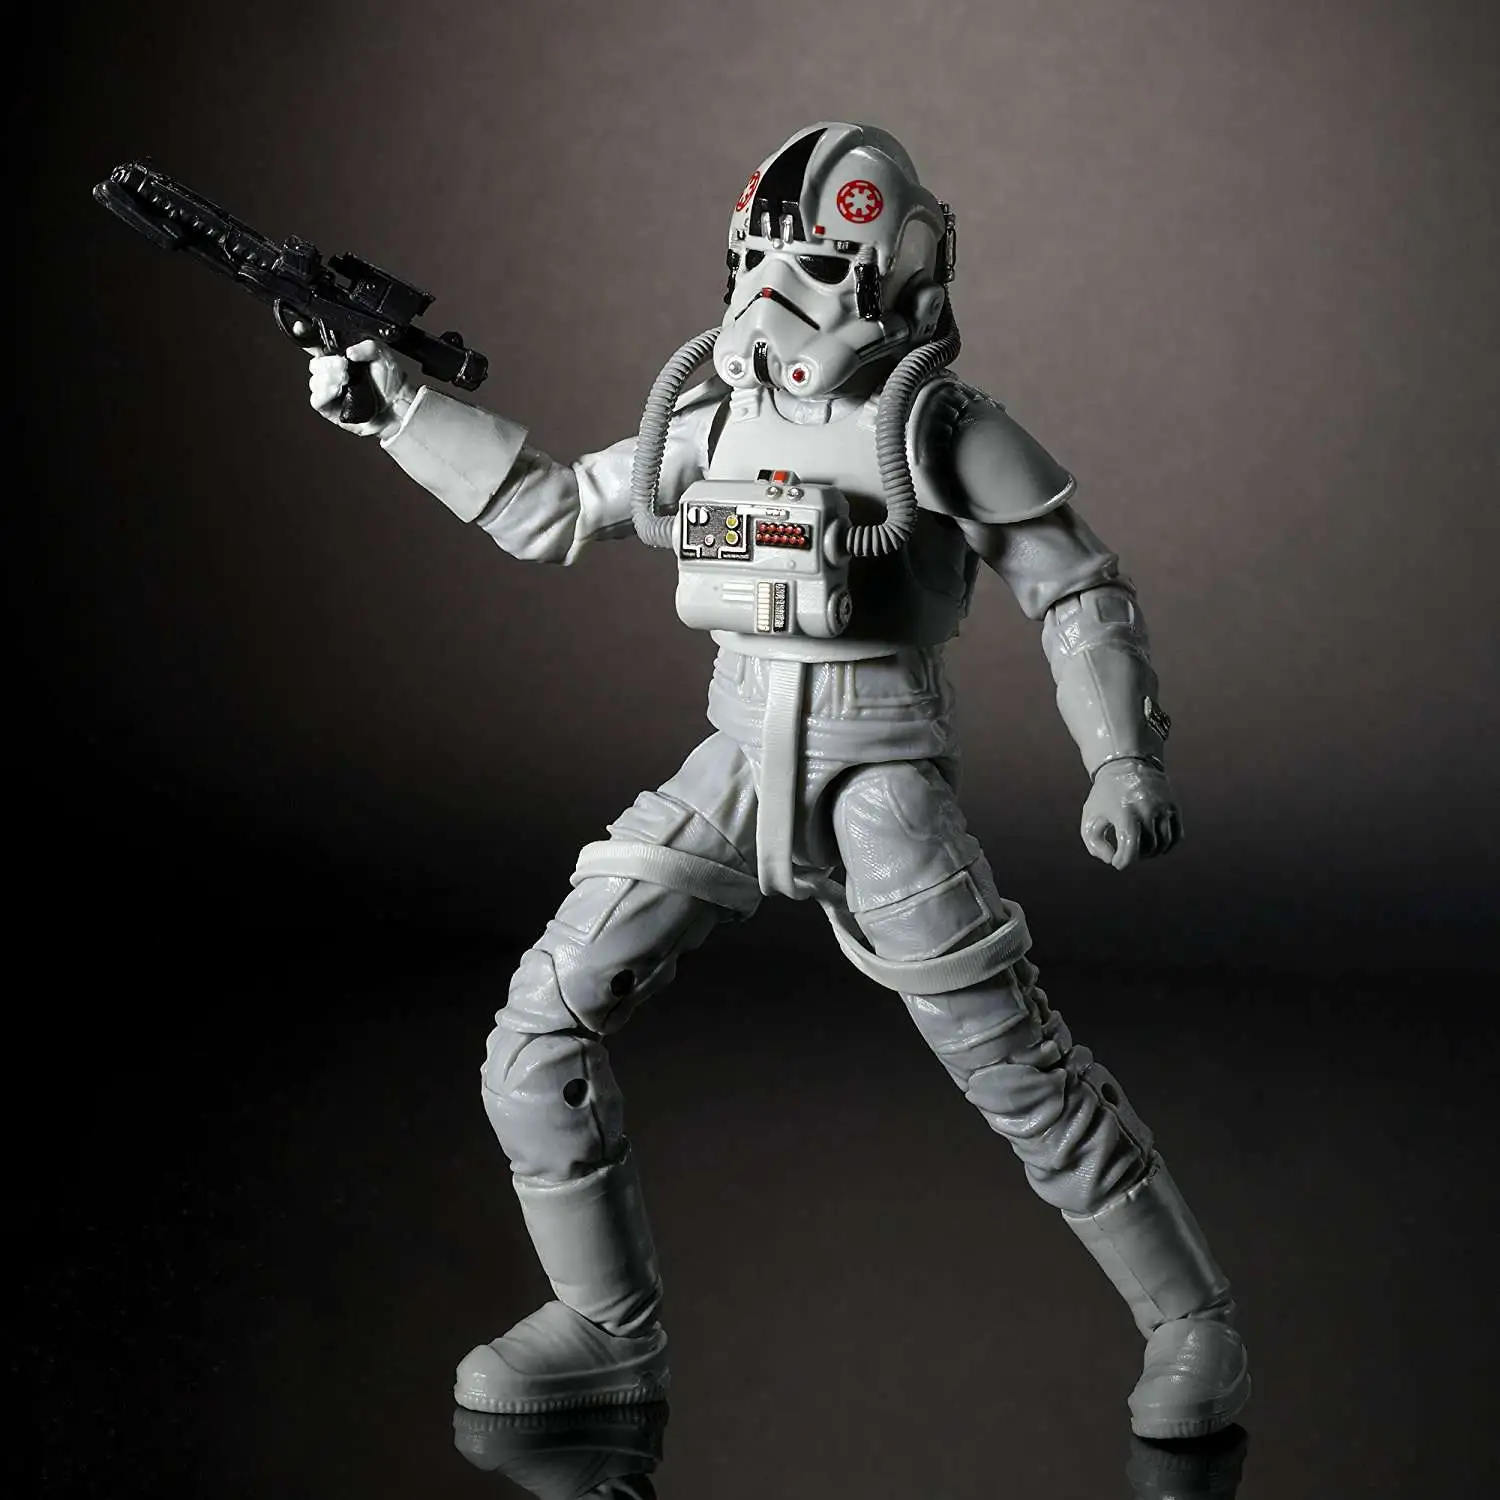 The Empire Details about   Star Wars The Black Series AT-AT Driver 6-inch Scale Star Wars